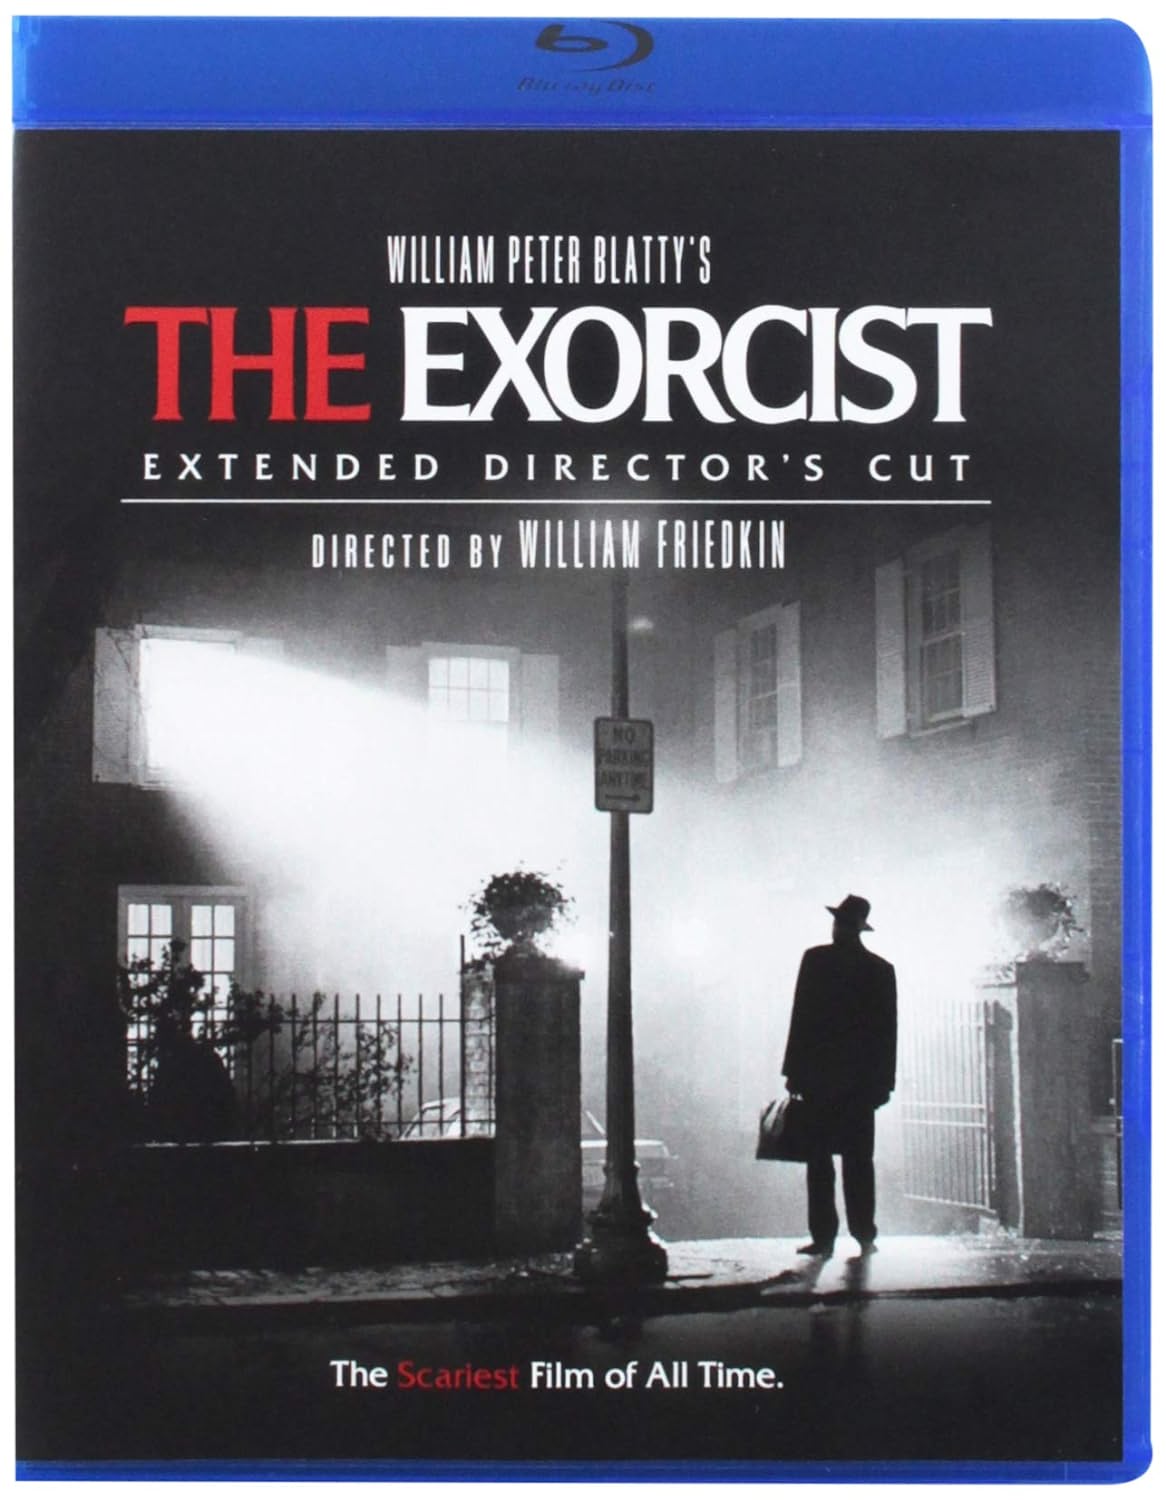 The Exorcist - Blu-ray [ 1973 ]  - Horror Movies On Blu-ray - Movies On GRUV